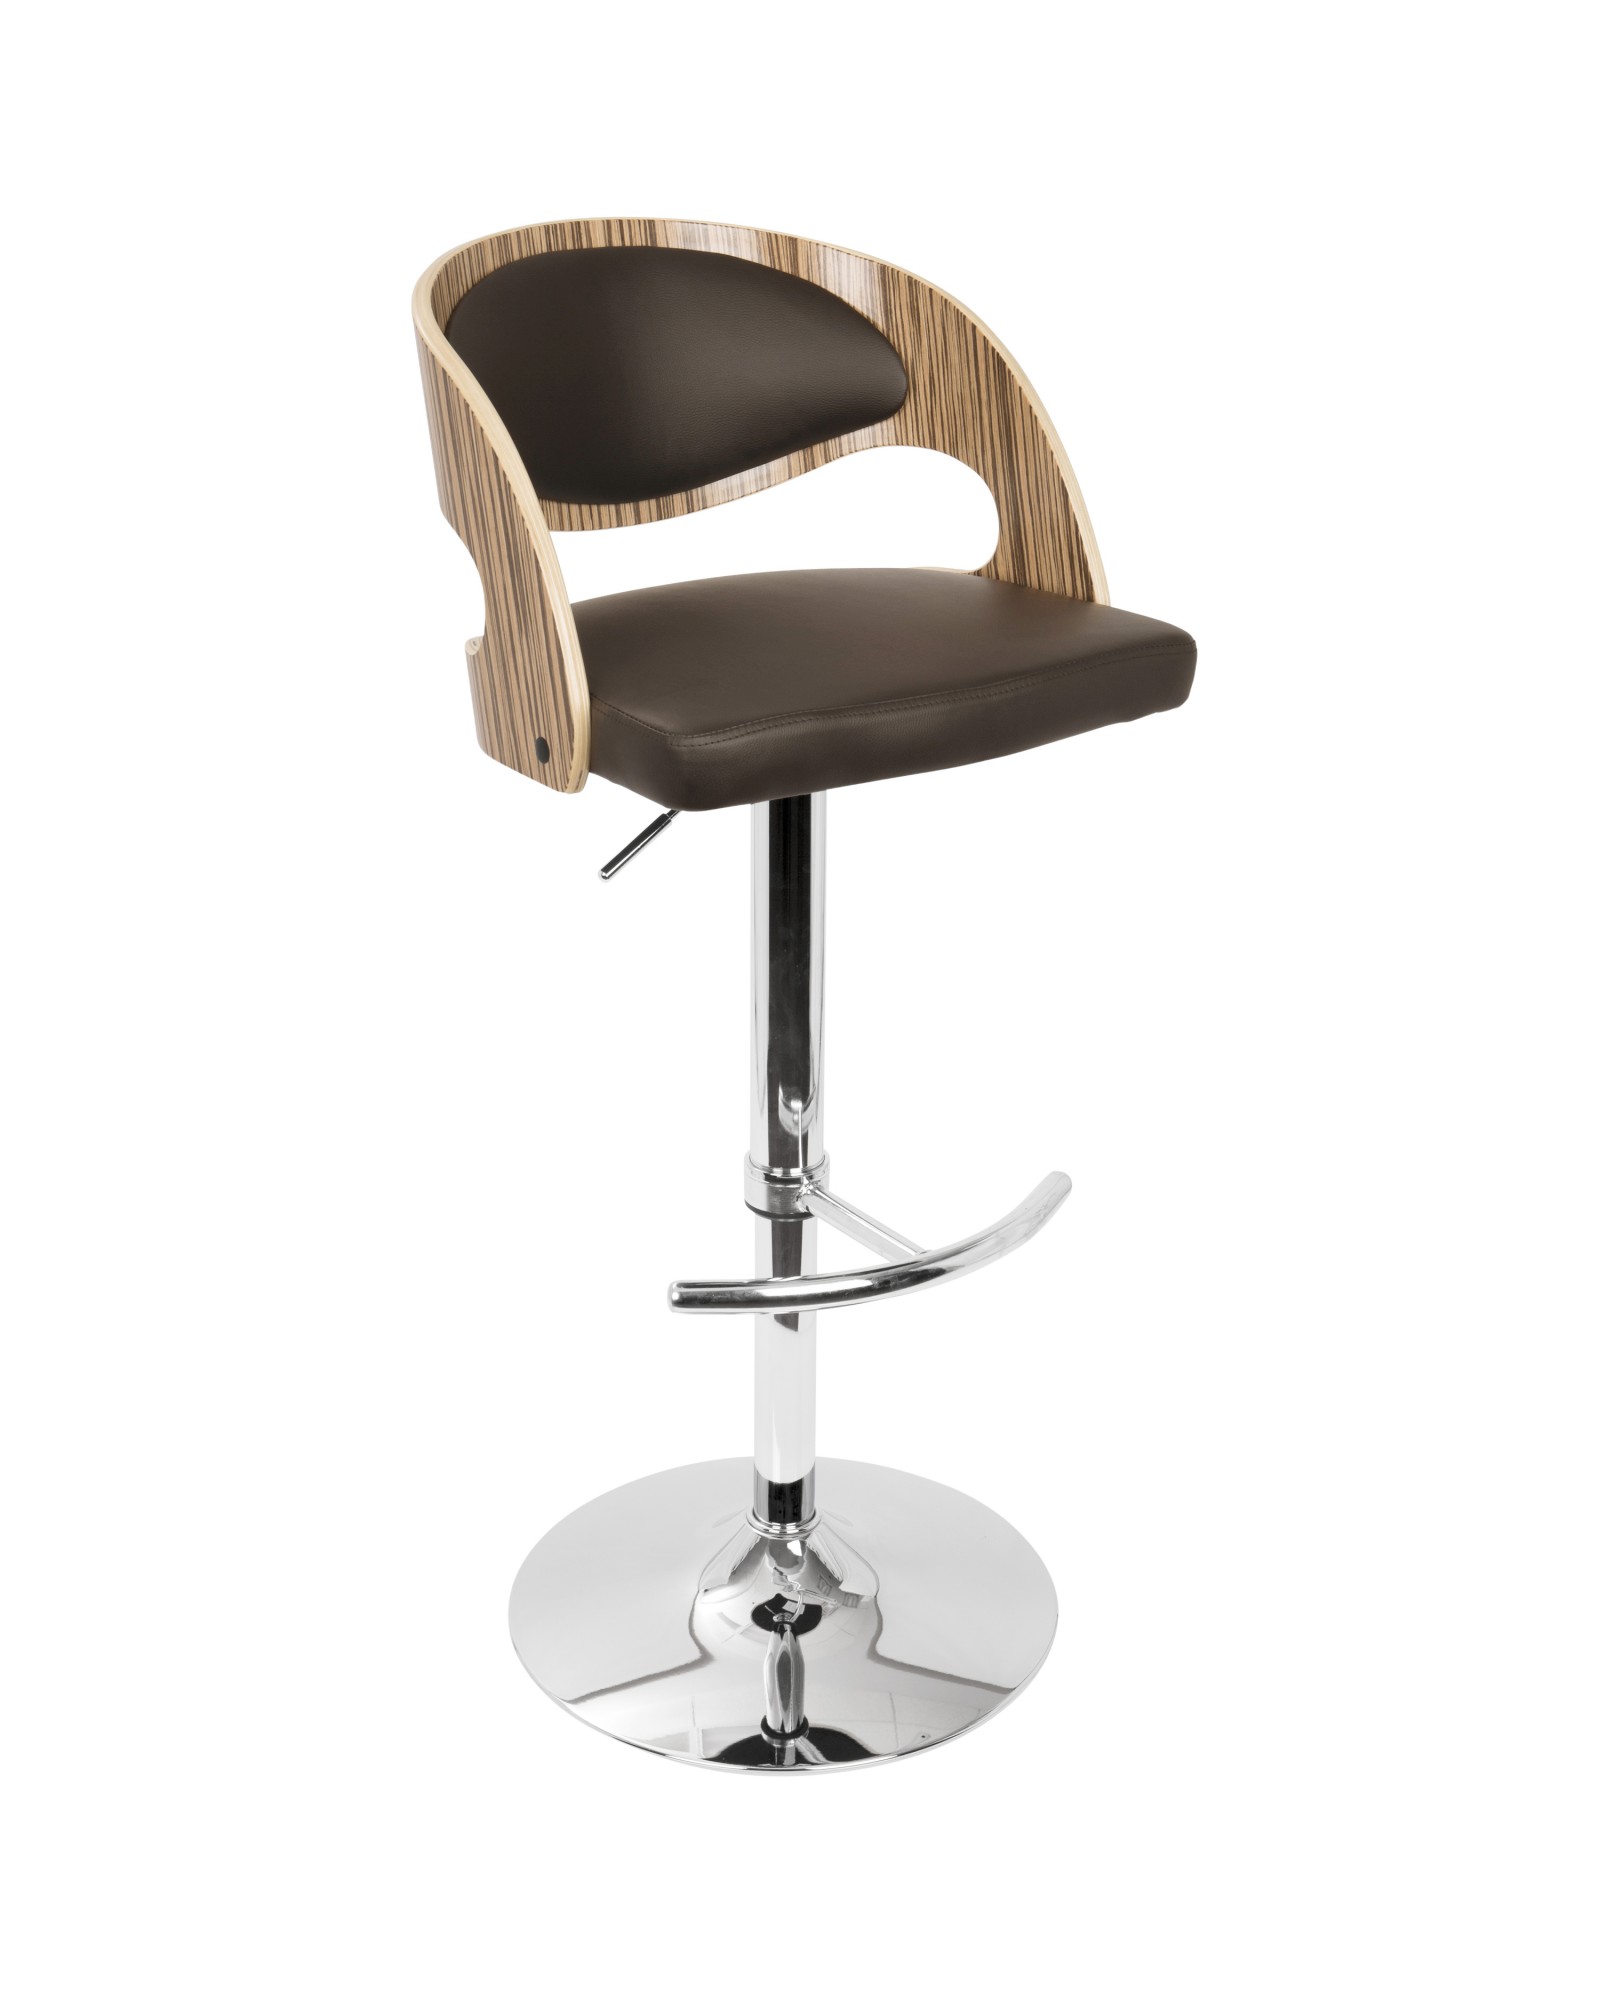 Pino Mid-Century Modern Adjustable Barstool with Swivel in Zebra and Brown Faux Leather